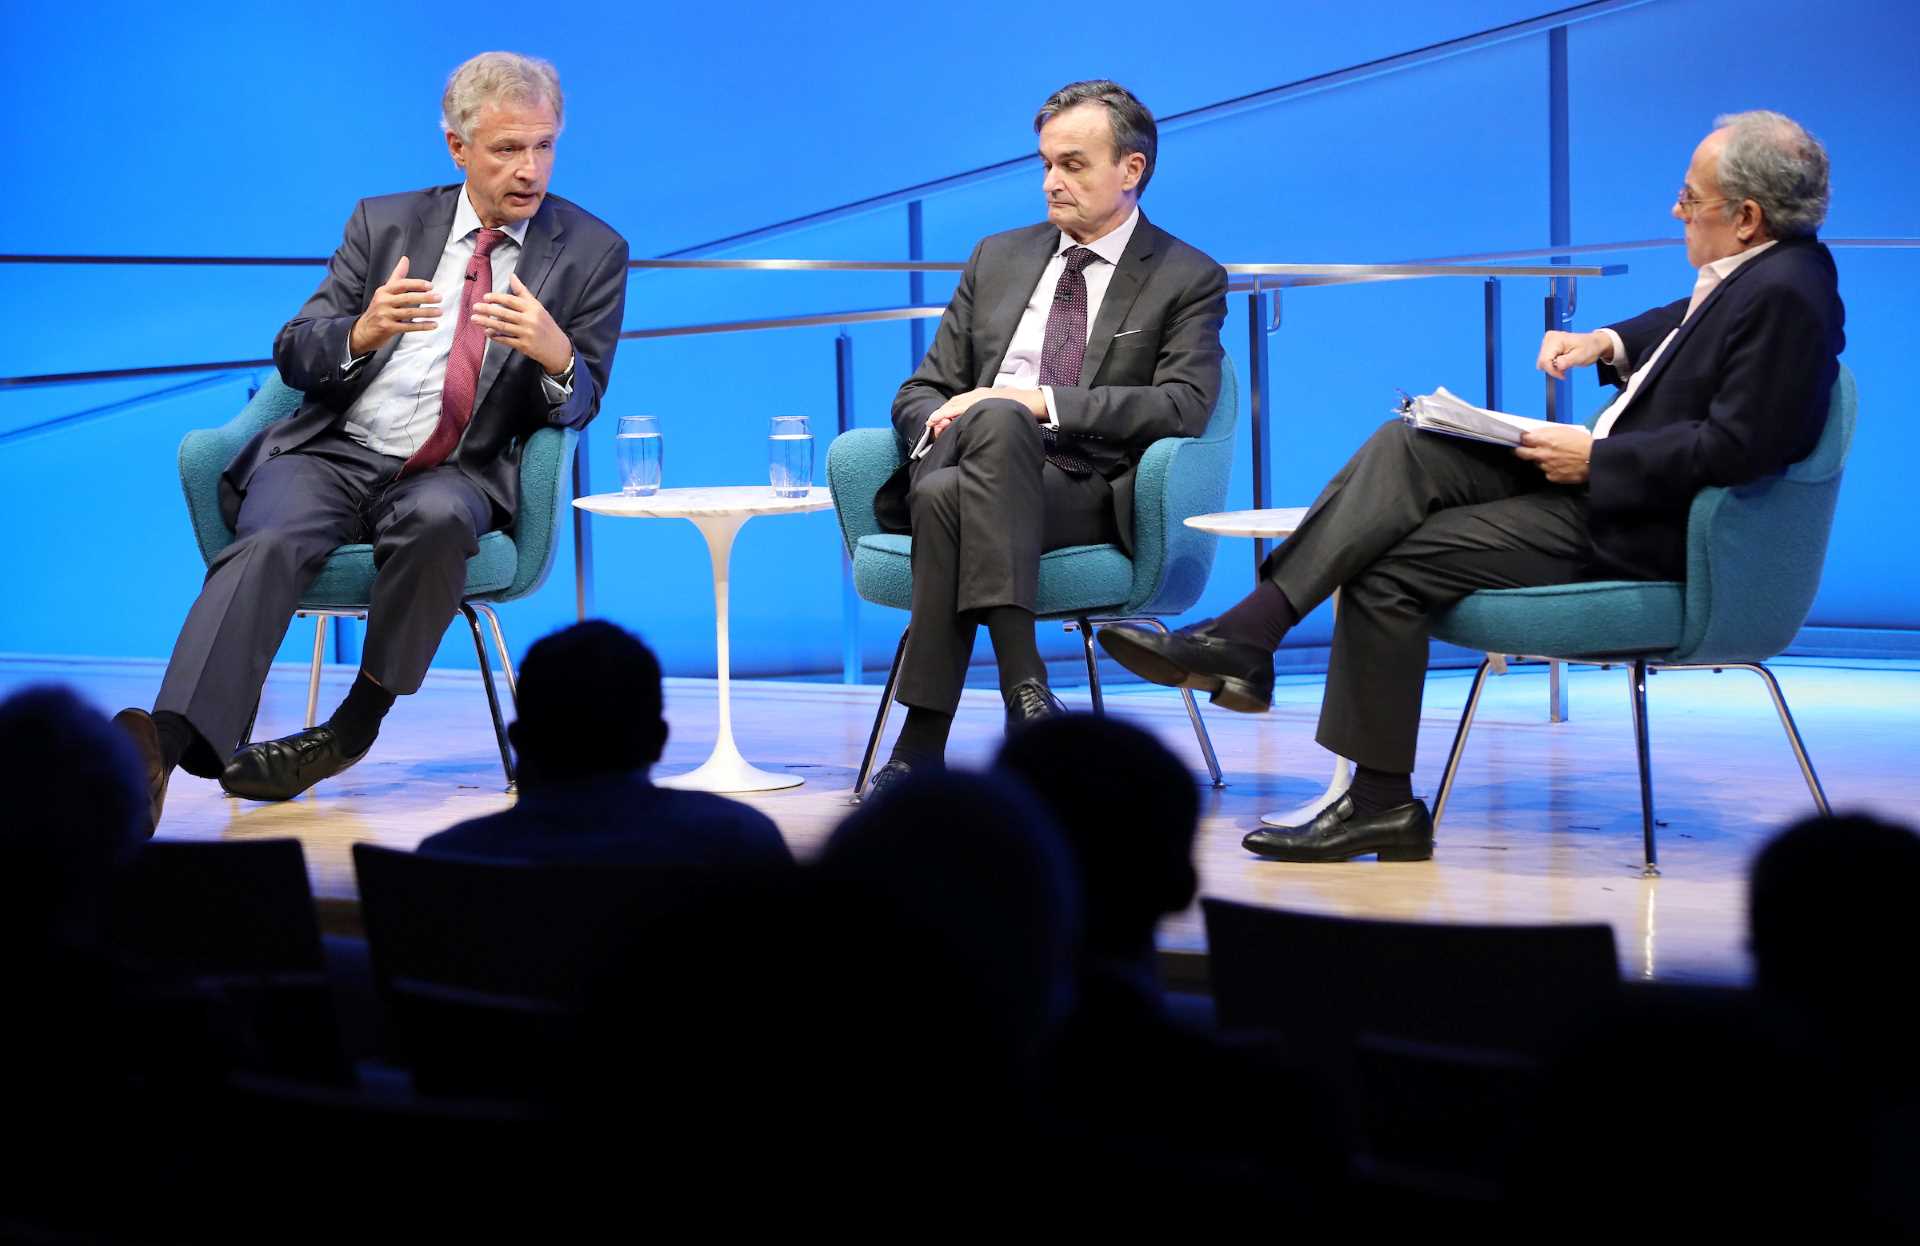 The silhouettes of audience members are visible in the foreground as Peter Ammon, former Ambassador of Germany to the U.S., speaks onstage during a public program in the Museum auditorium. He is seated next to Gérard Araud, former Ambassador of France to the U.S., and Clifford Chanin, the executive vice president and deputy director for museum programs.